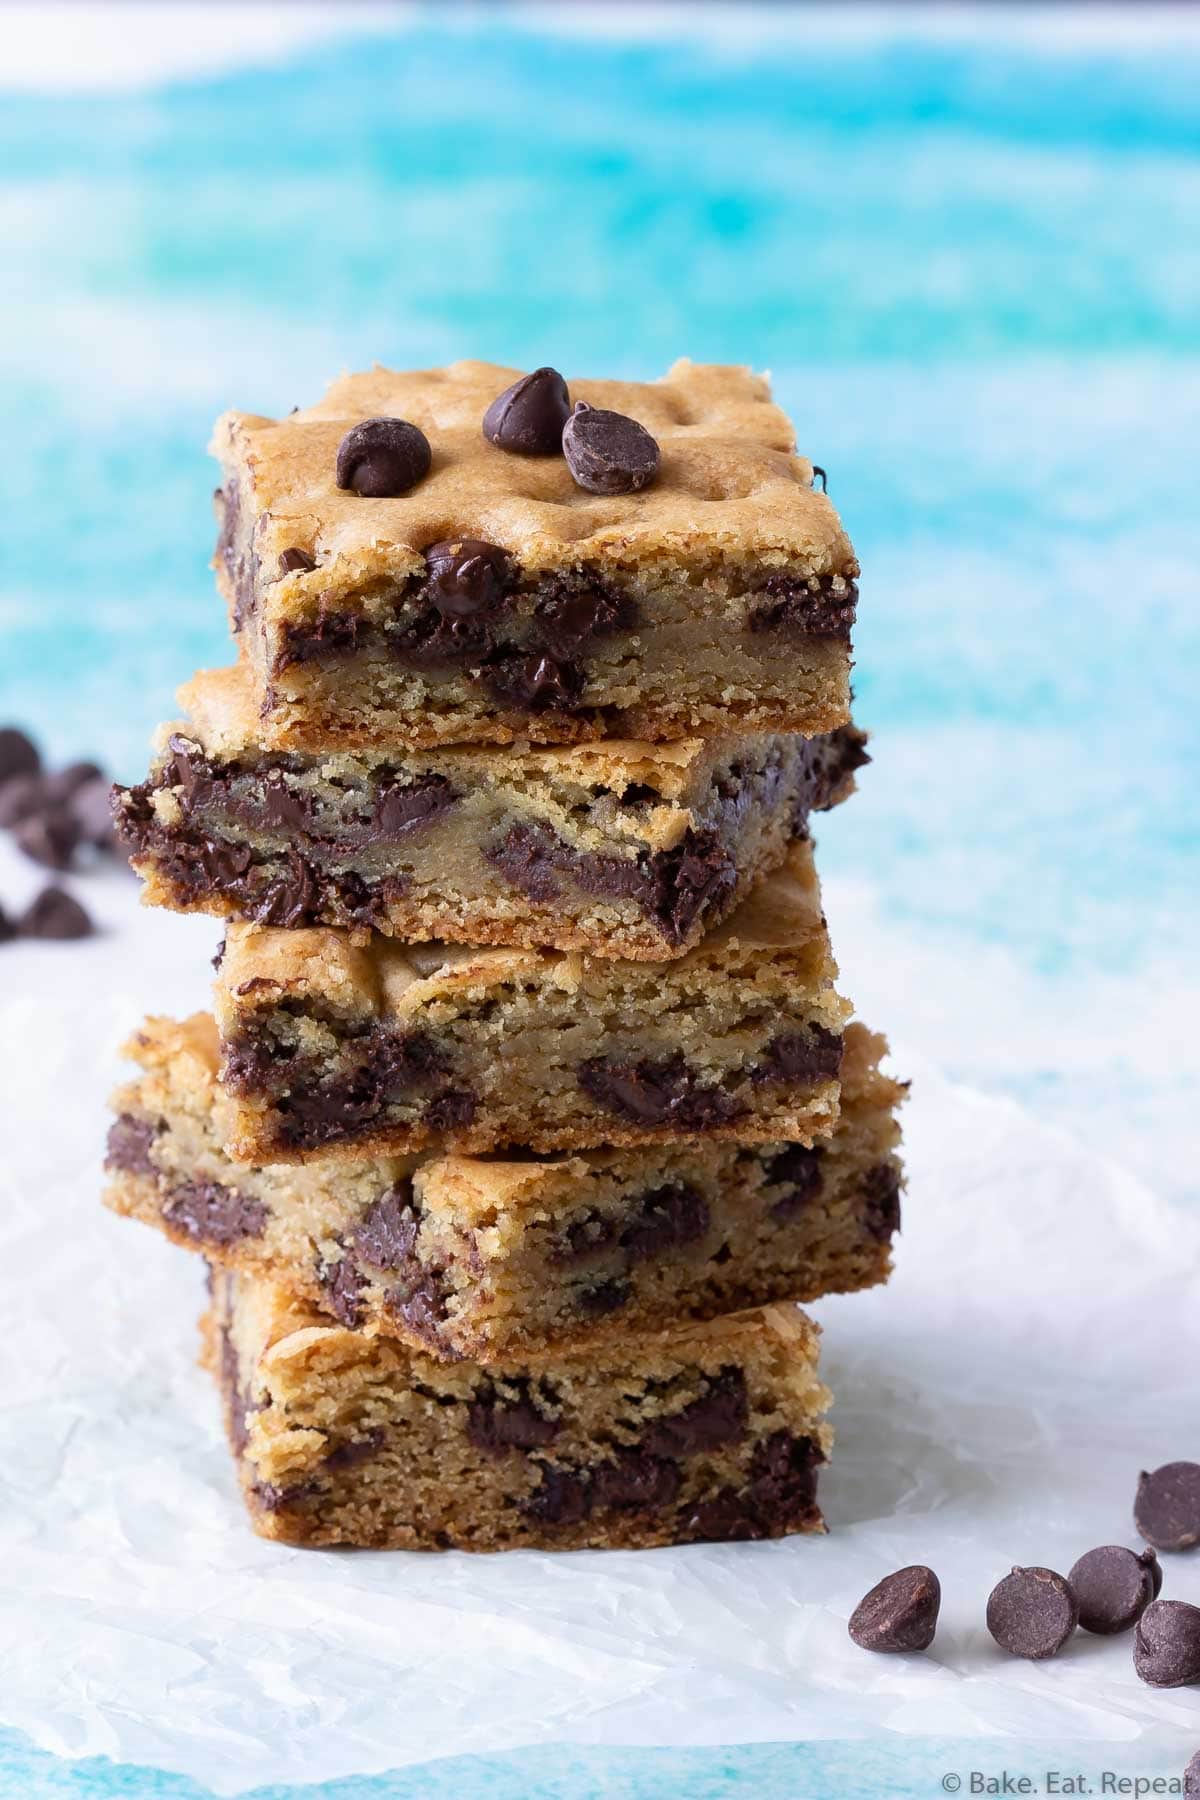 https://bake-eat-repeat.com/wp-content/uploads/2020/10/Chocolate-Chip-Cookie-Bars-9.jpg